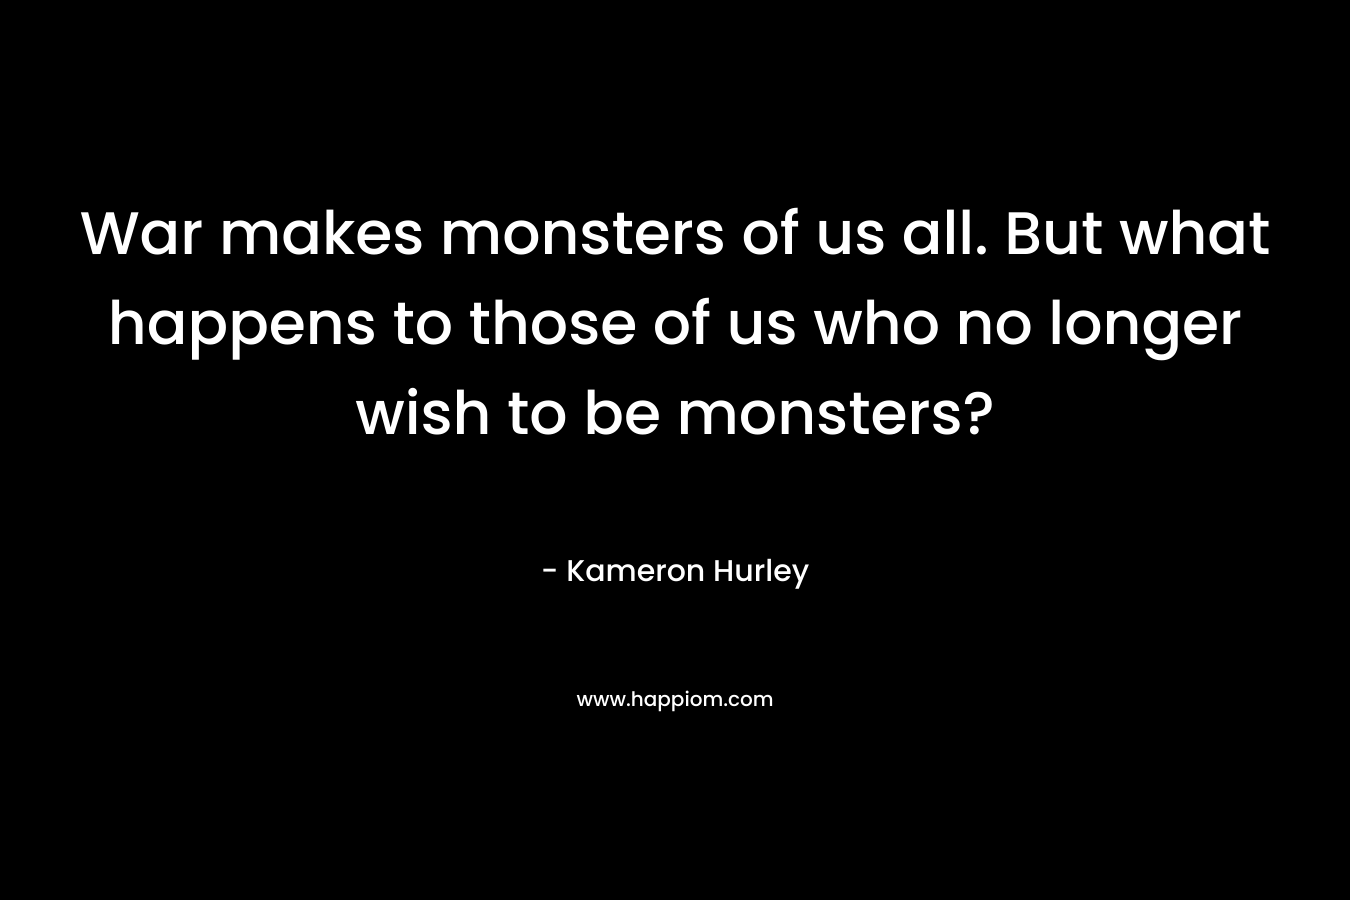 War makes monsters of us all. But what happens to those of us who no longer wish to be monsters?